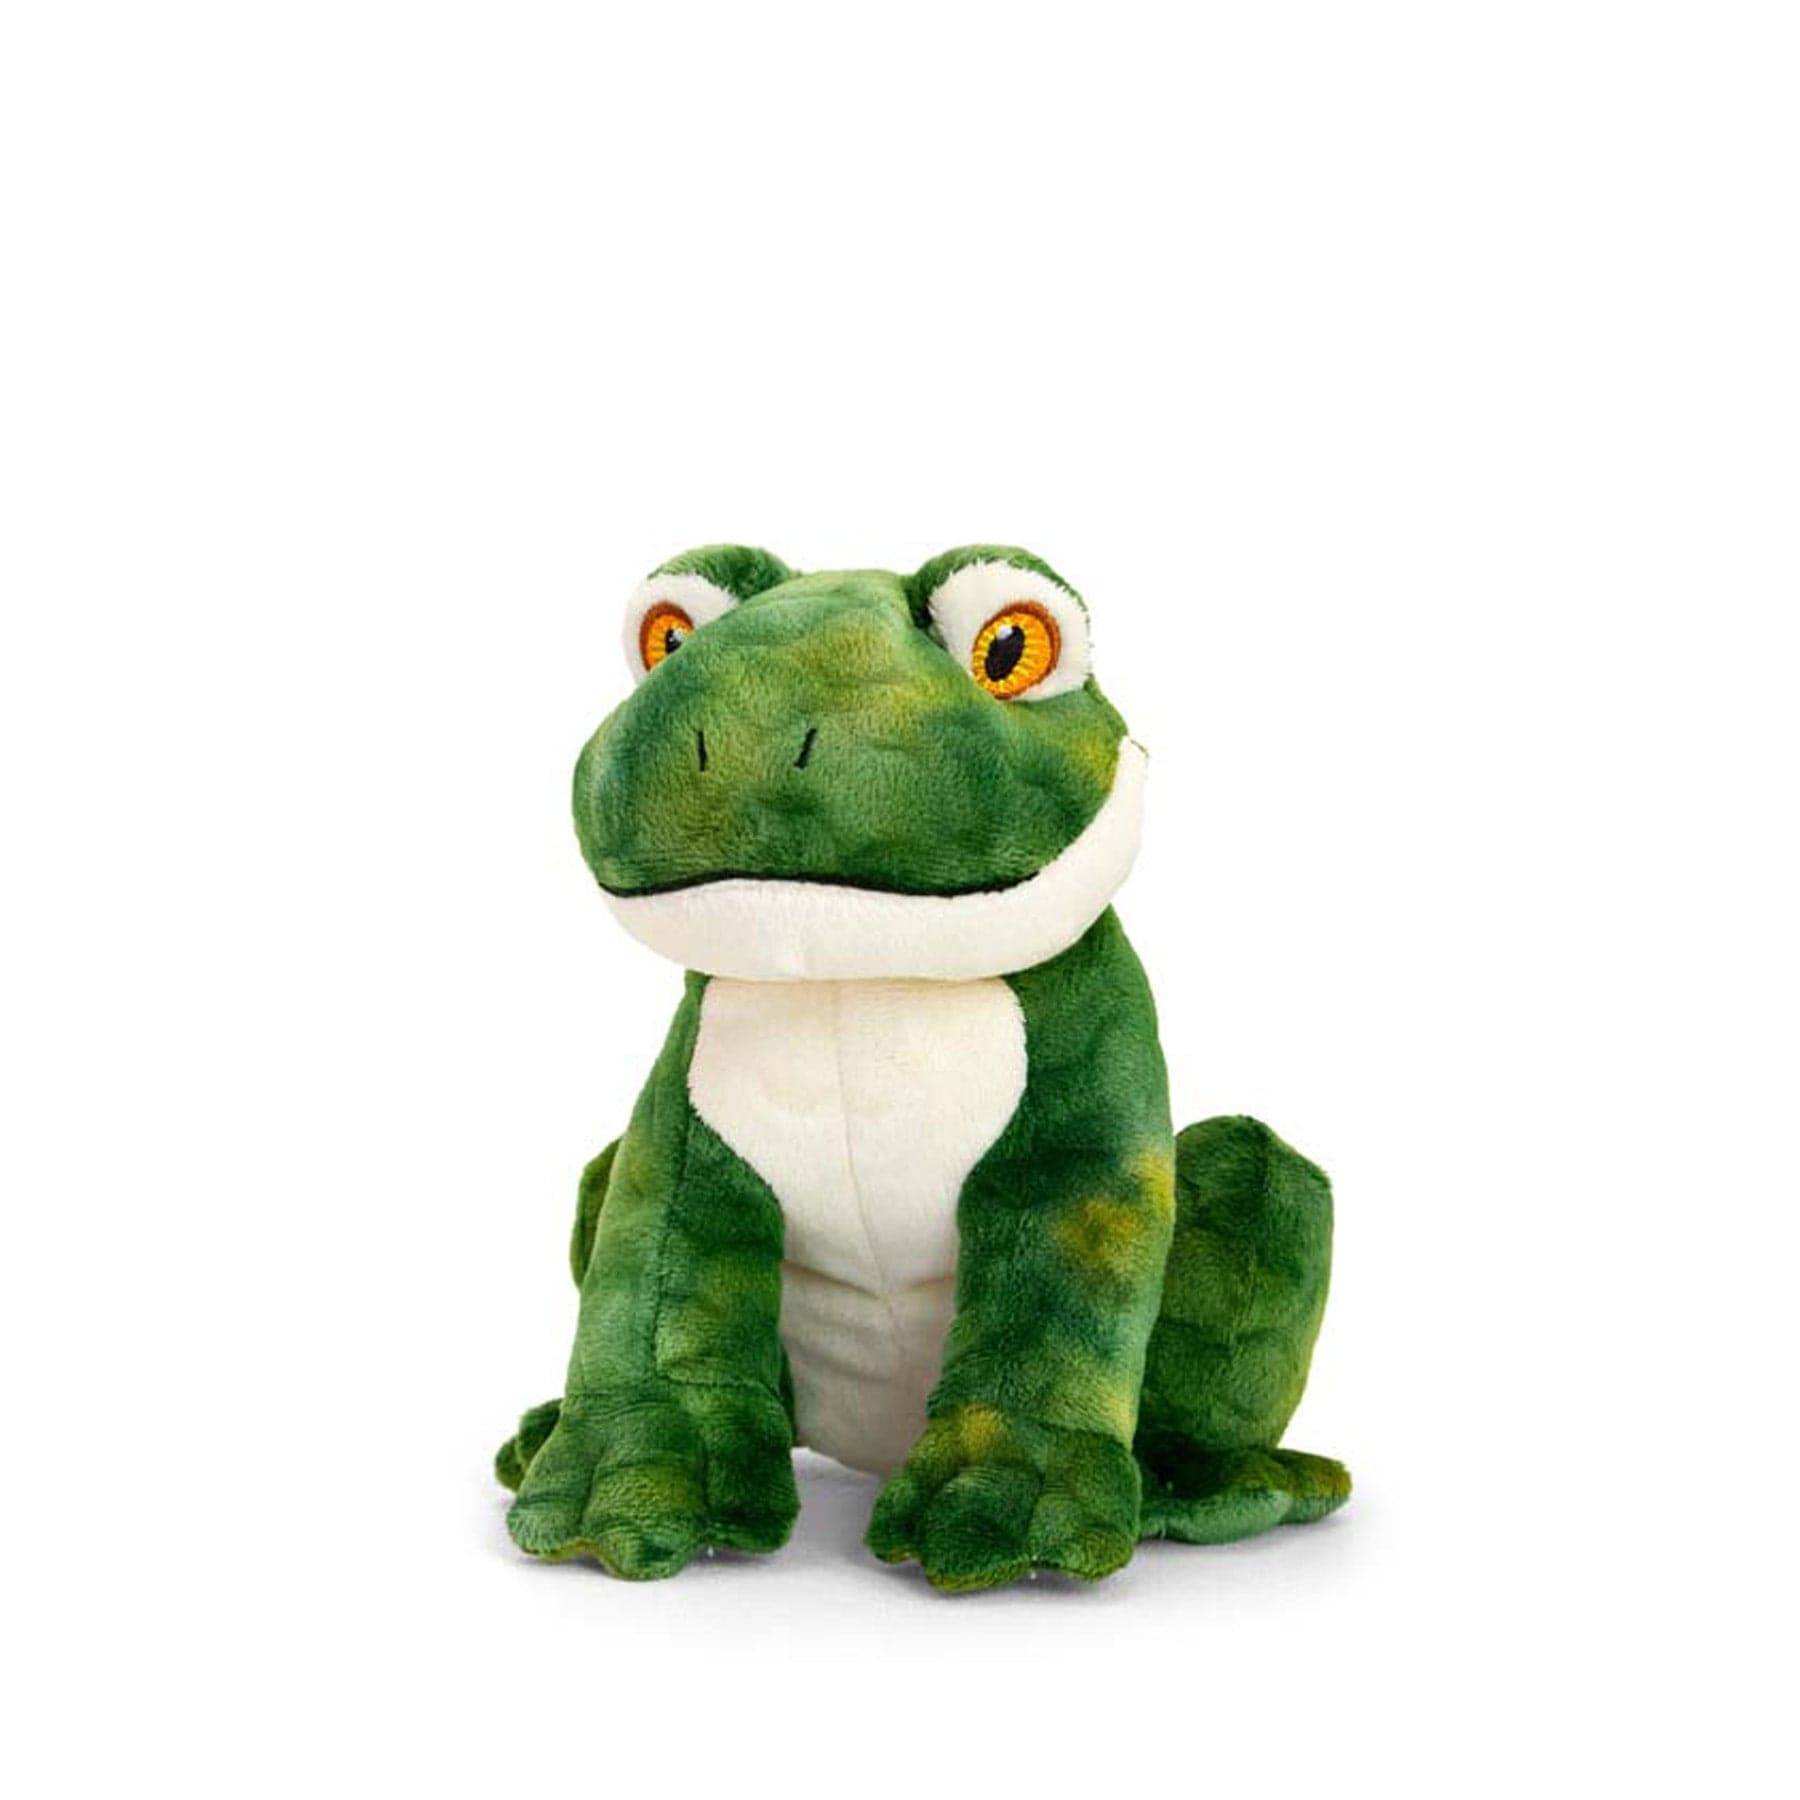 Green plush dinosaur toy sitting isolated on white background, cute stuffed animal, T-Rex soft toy for children